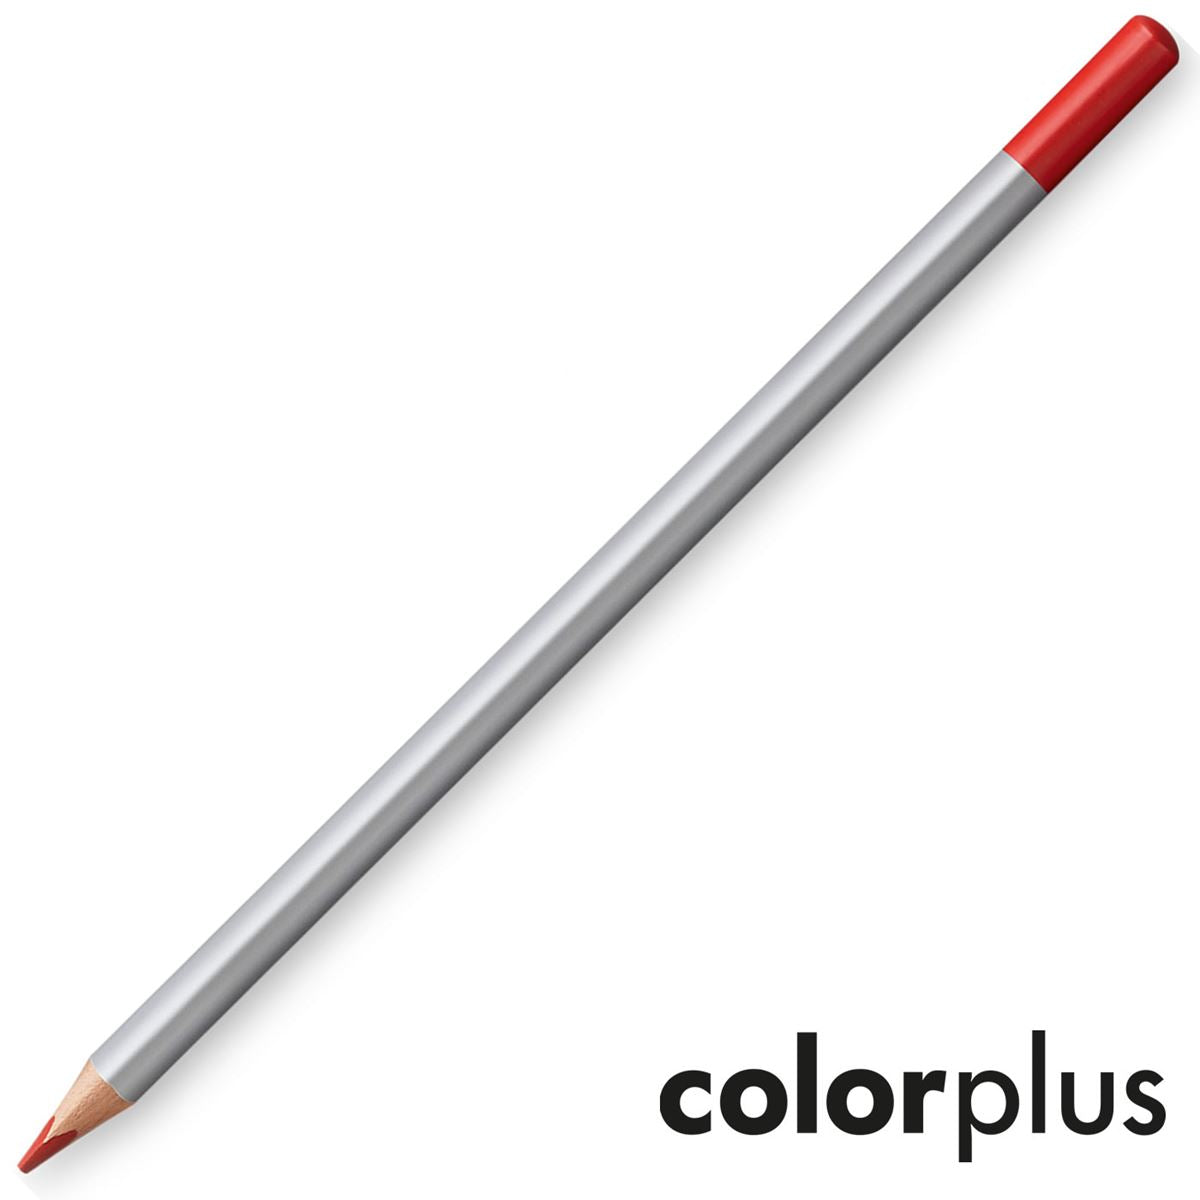 Lamy Colorplus Colouring Pencils - Pack of 36